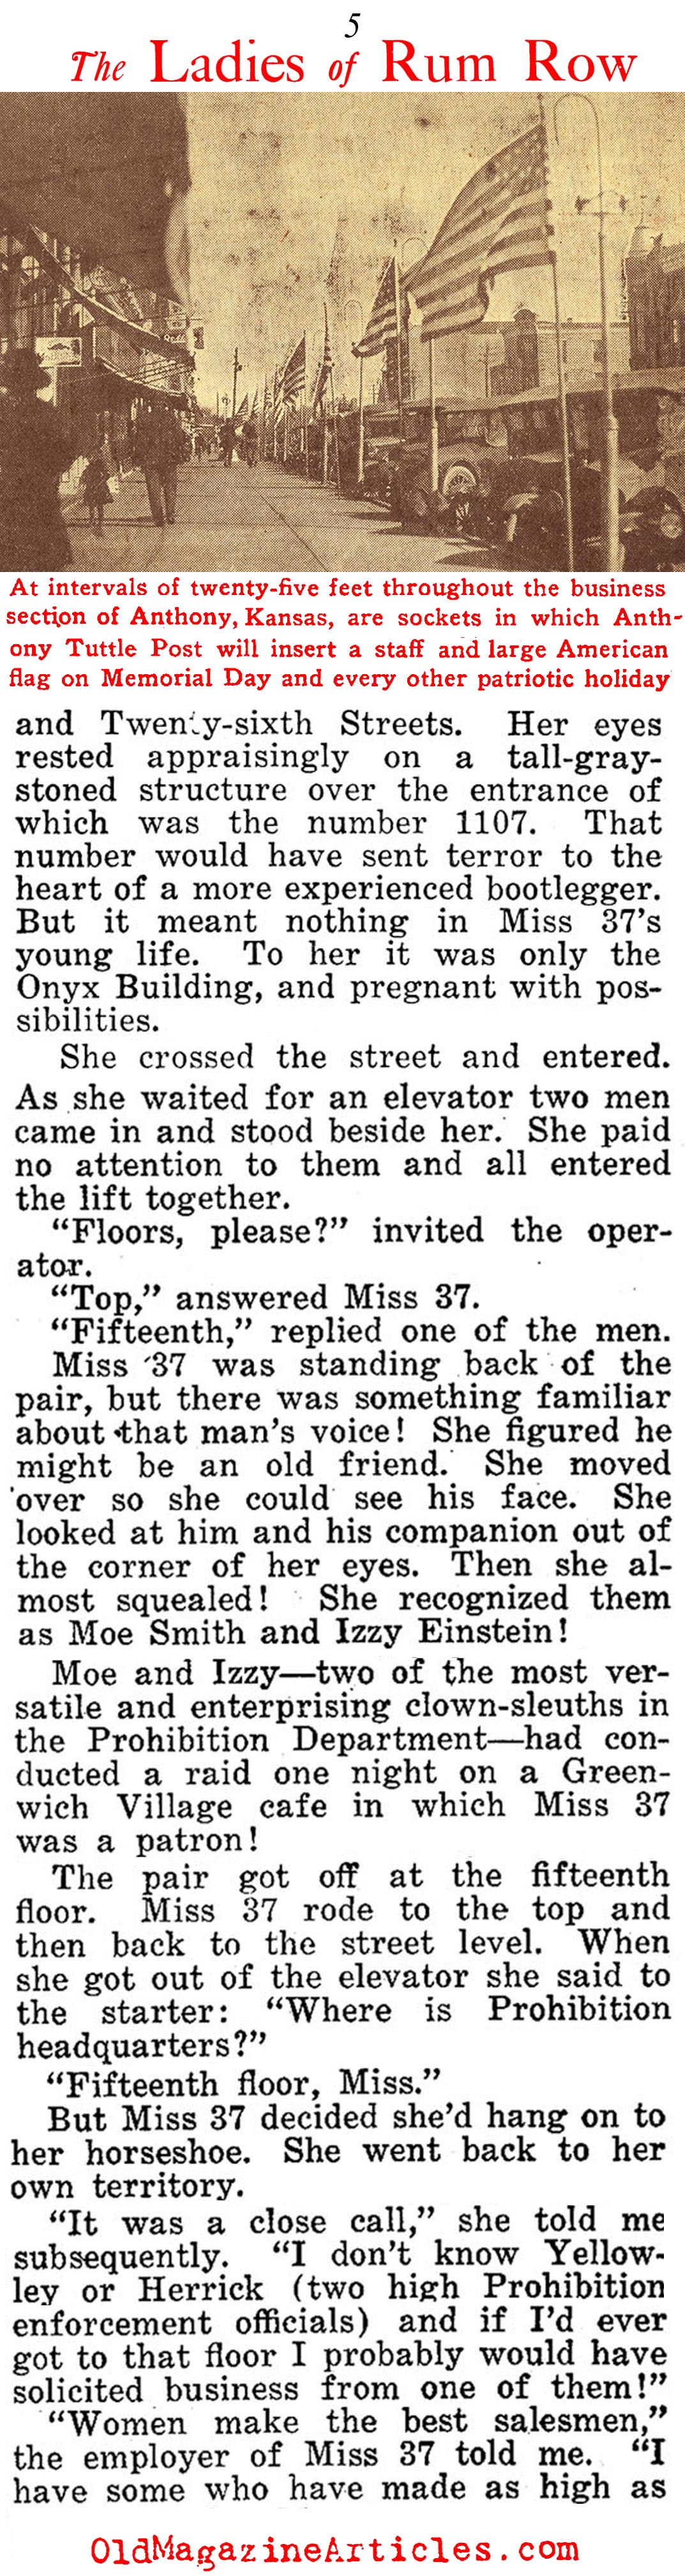 Prohibition Era Prisons Filled with Women (American Legion Weekly, 1924)